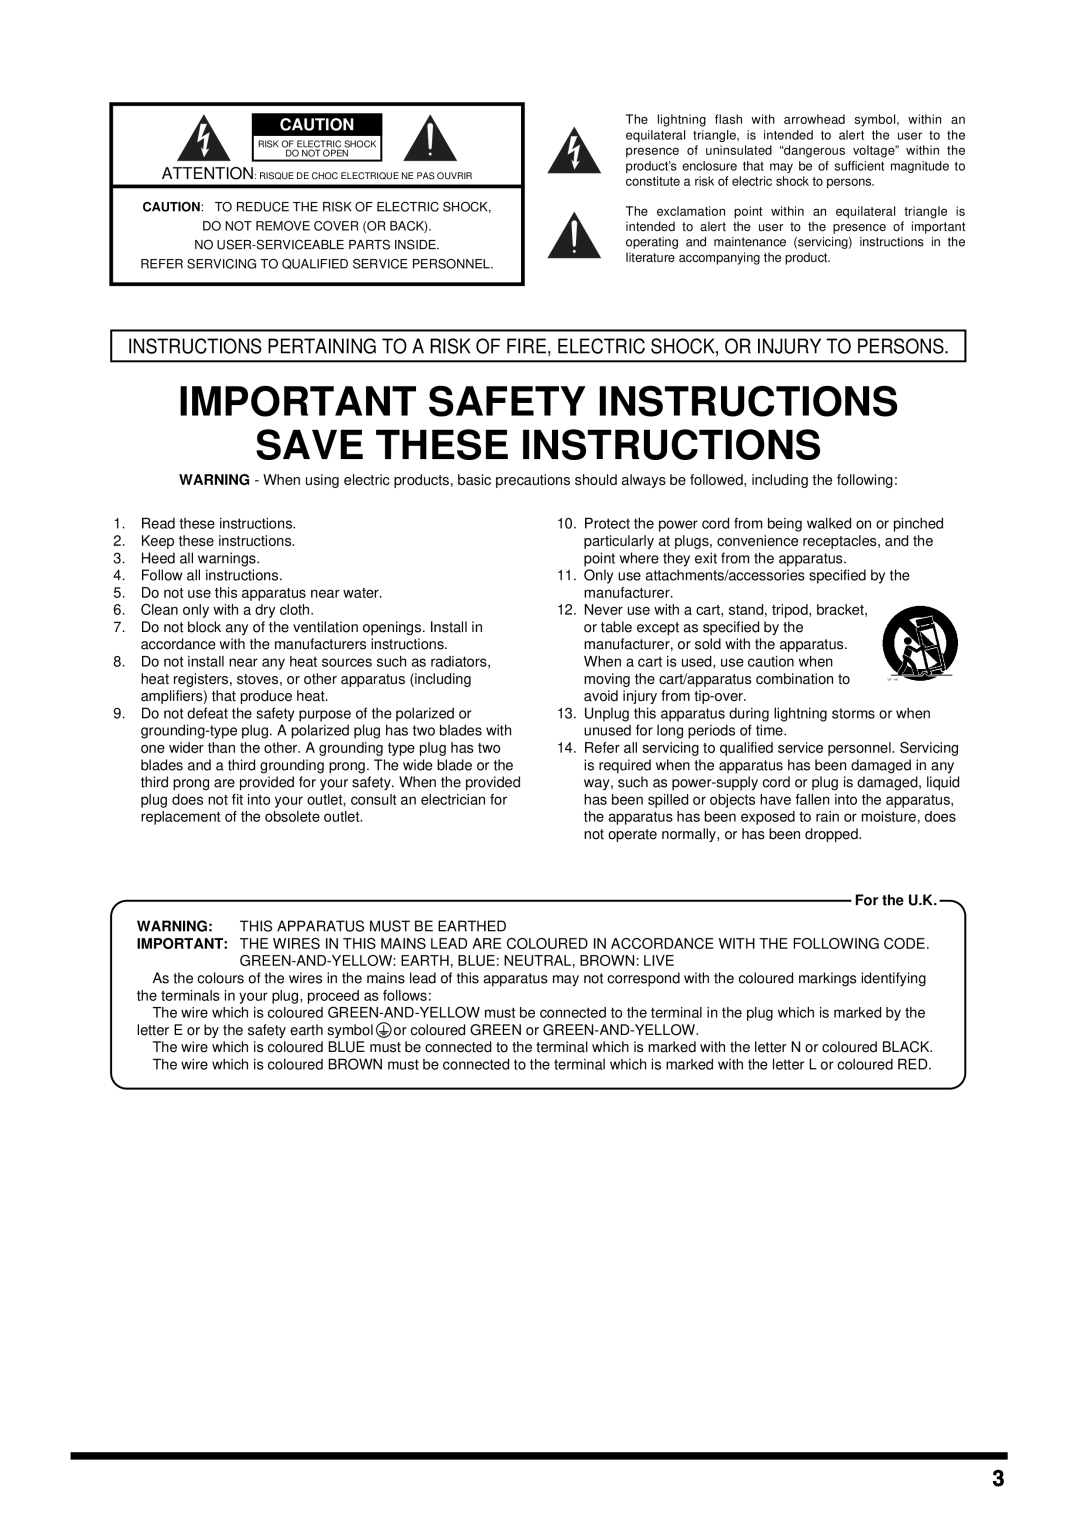 Roland DS-30A owner manual Important Safety Instructions Save These Instructions, For the U.K 